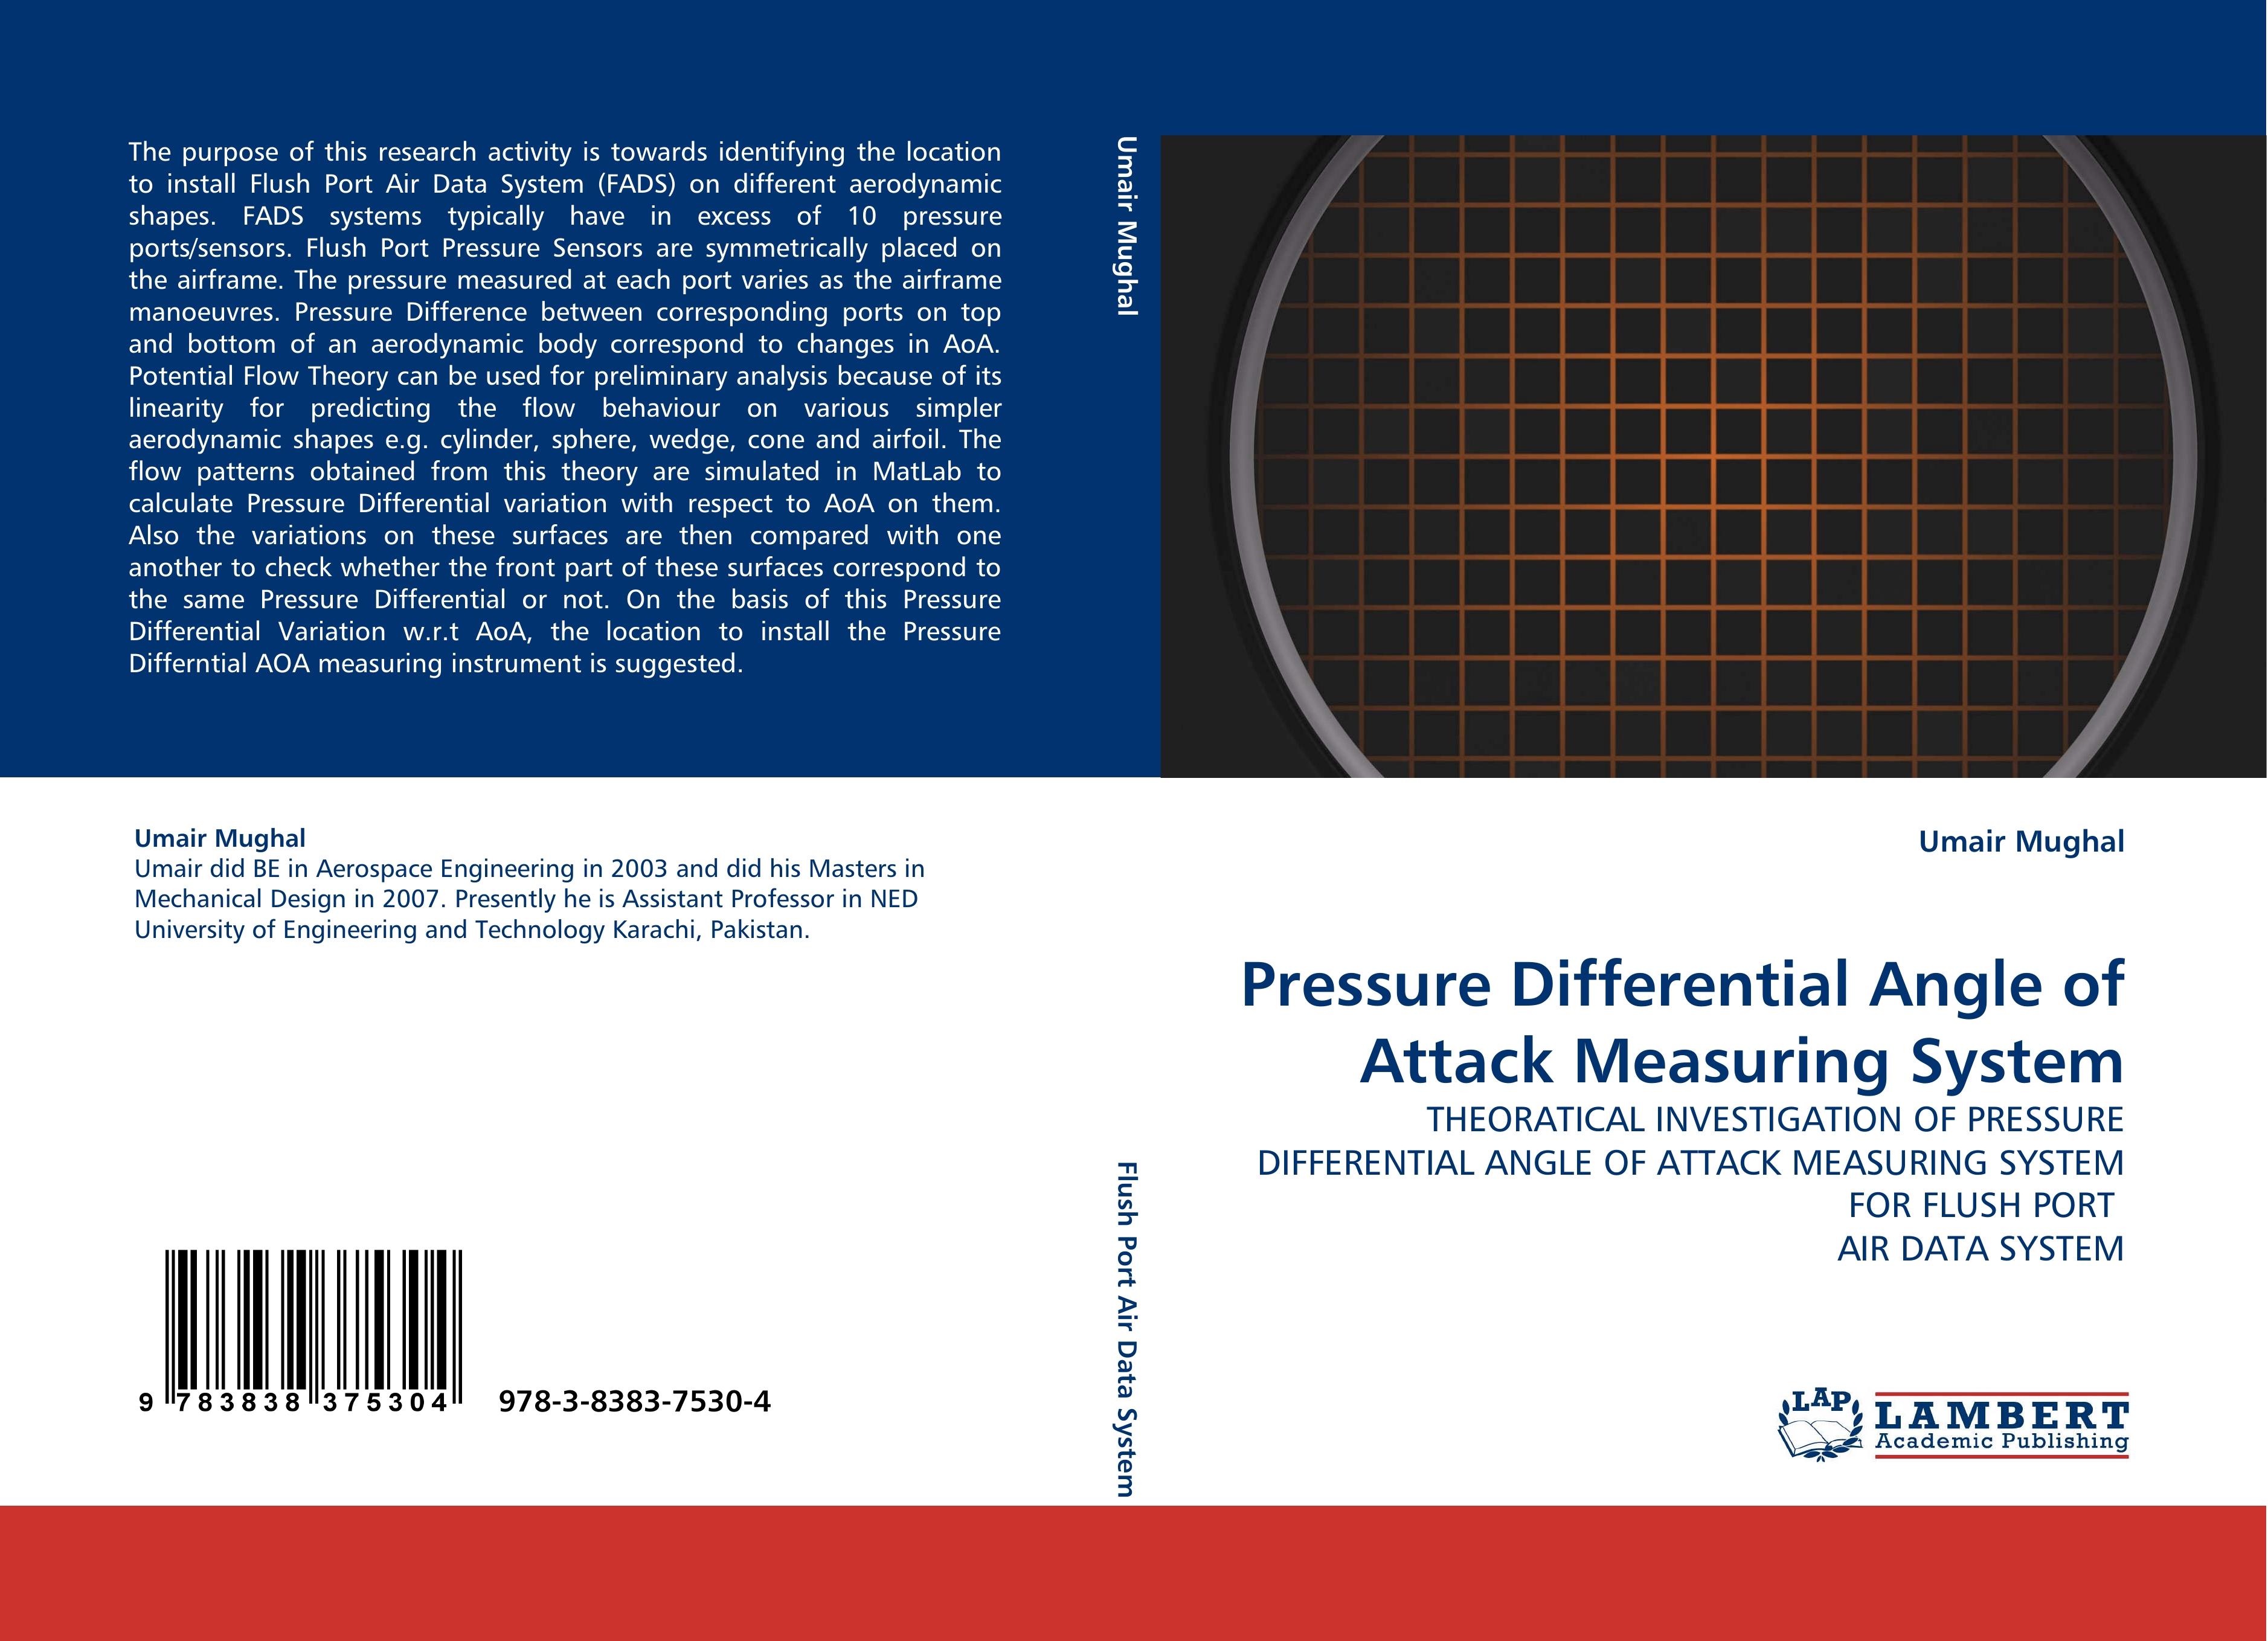 Pressure Differential Angle of Attack Measuring System / THEORATICAL INVESTIGATION OF PRESSURE DIFFERENTIAL ANGLE OF ATTACK MEASURING SYSTEM FOR FLUSH PORT AIR DATA SYSTEM / Umair Mughal / Taschenbuch - Mughal, Umair